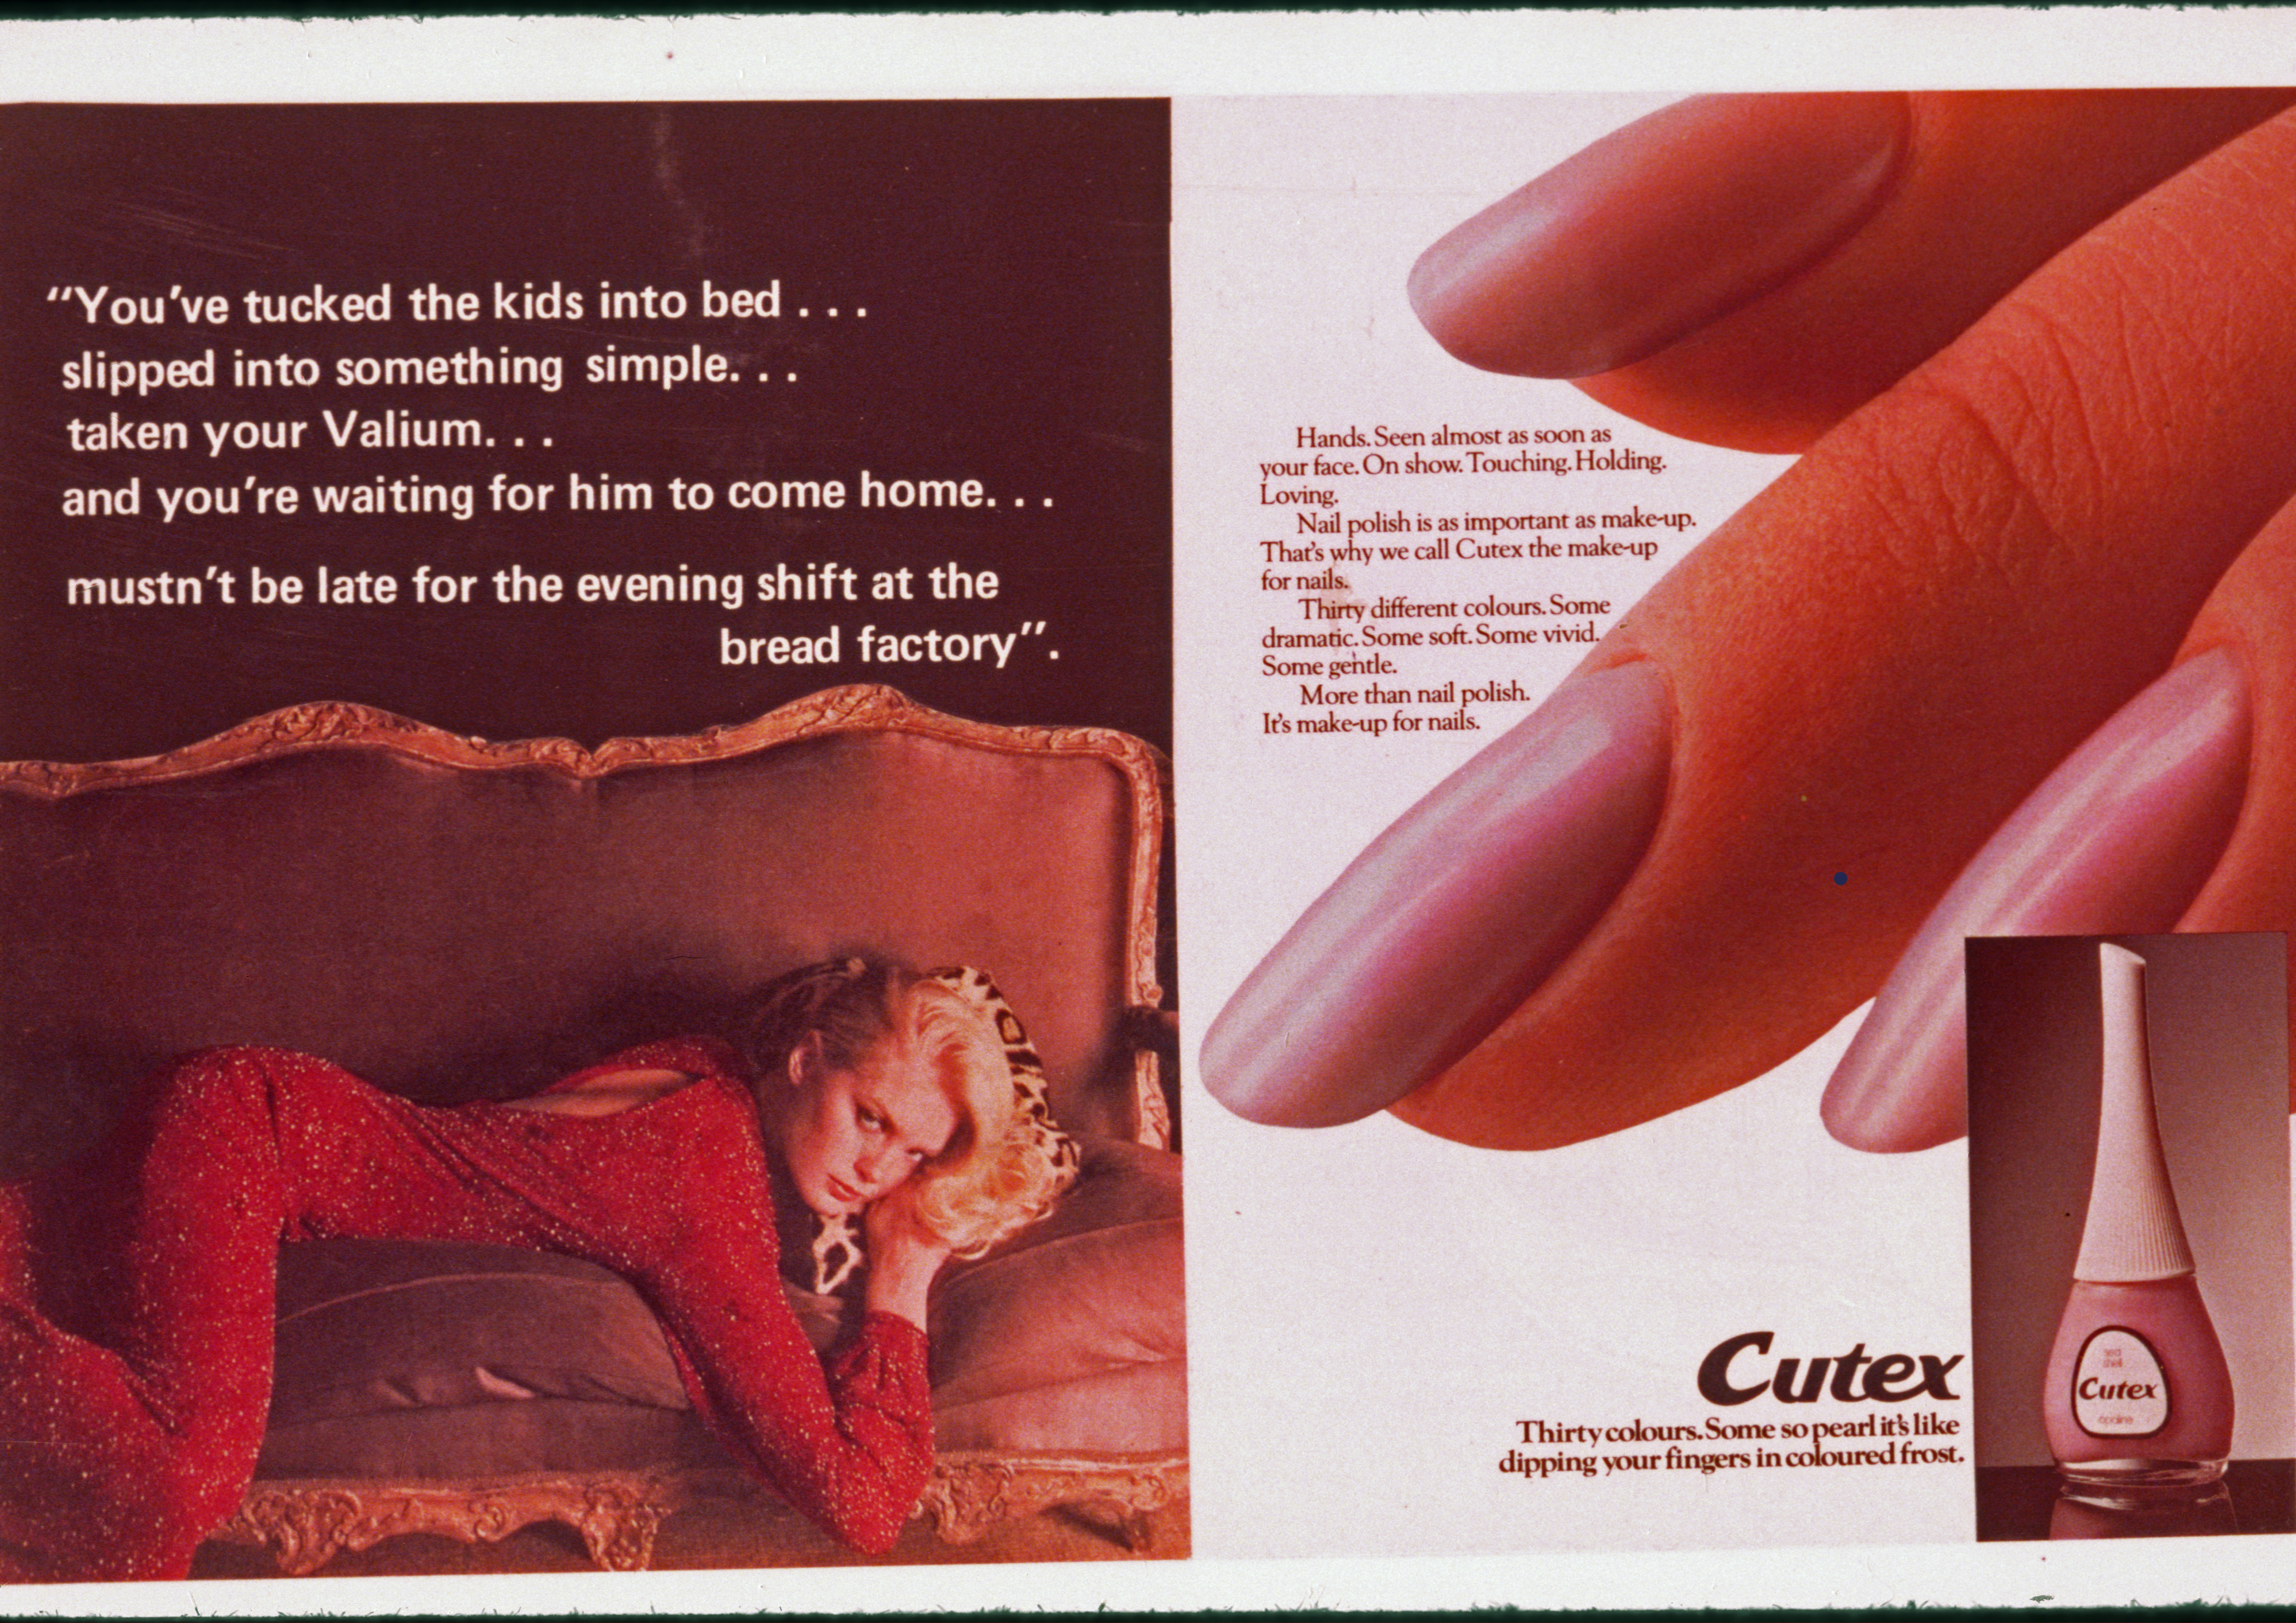 Cutex photomontage by the Hackney Flashers. A 1970s luxusious beauty advert for nail polish is juxtaposed with text about the stress of a woman's life. The text reads "You've tucked the kids into bed... slipped into something simple... taken your Valium.. and you're waiting for him to come home... mustn't be late for the evening shift at the bread factory".